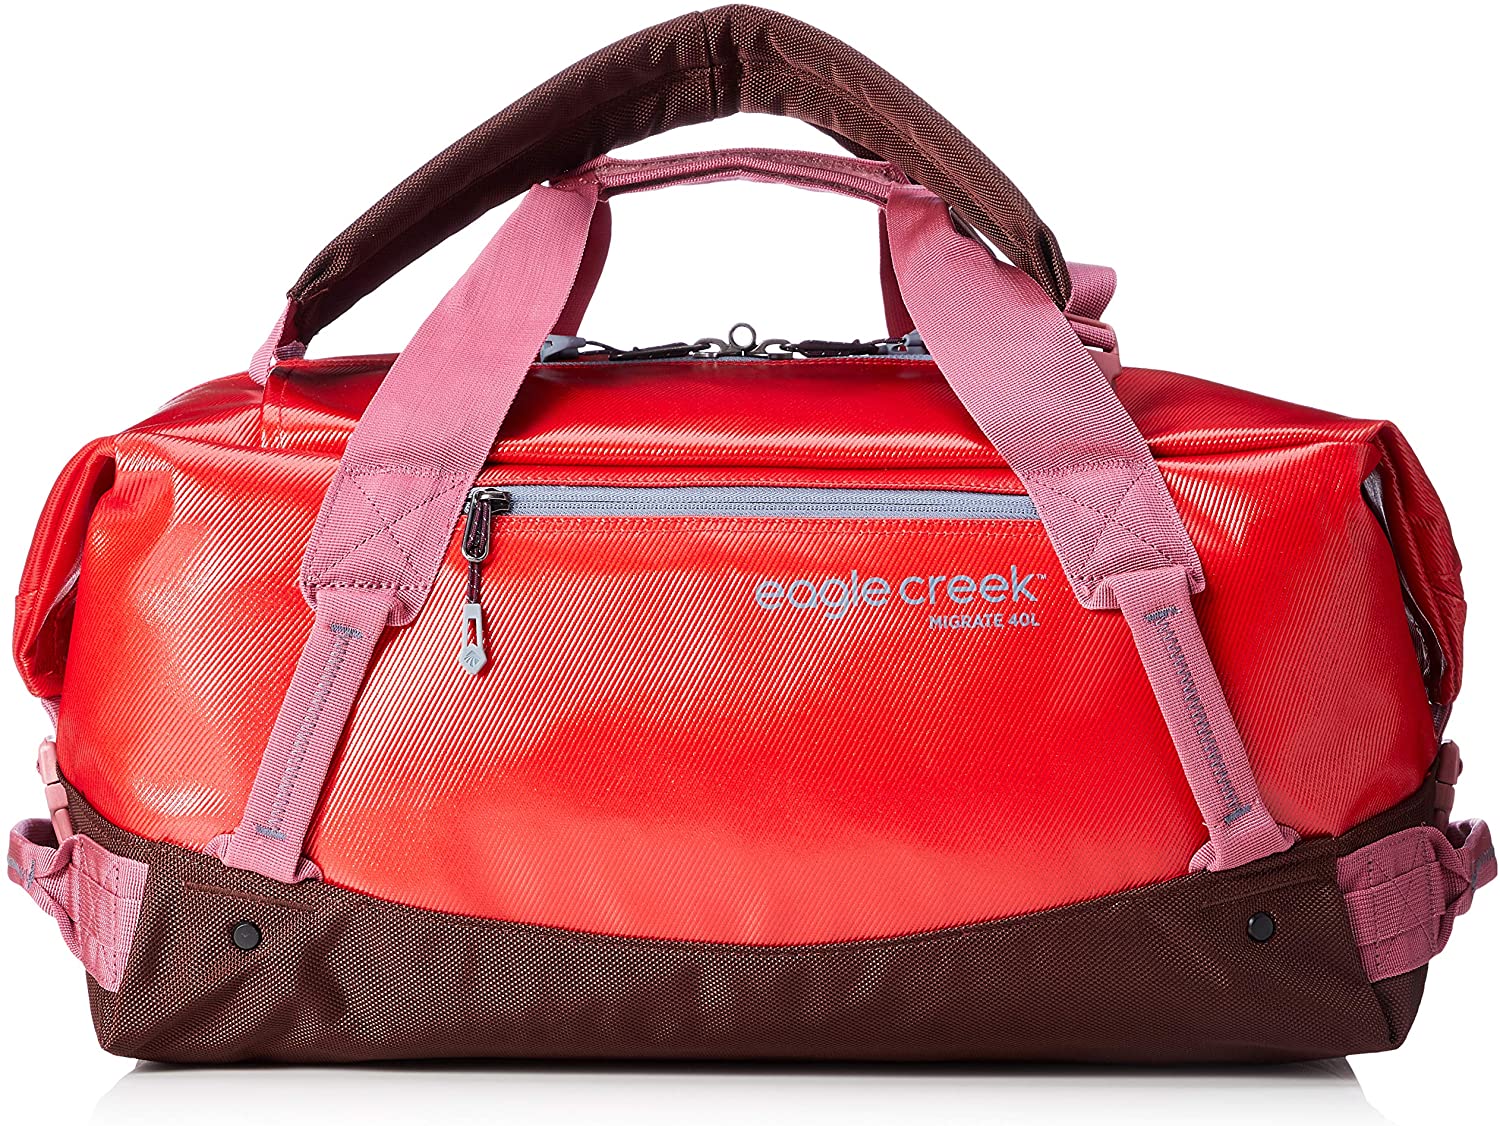 Eagle Creek Migrate Duffel 40L in Coral Sunset color from the front